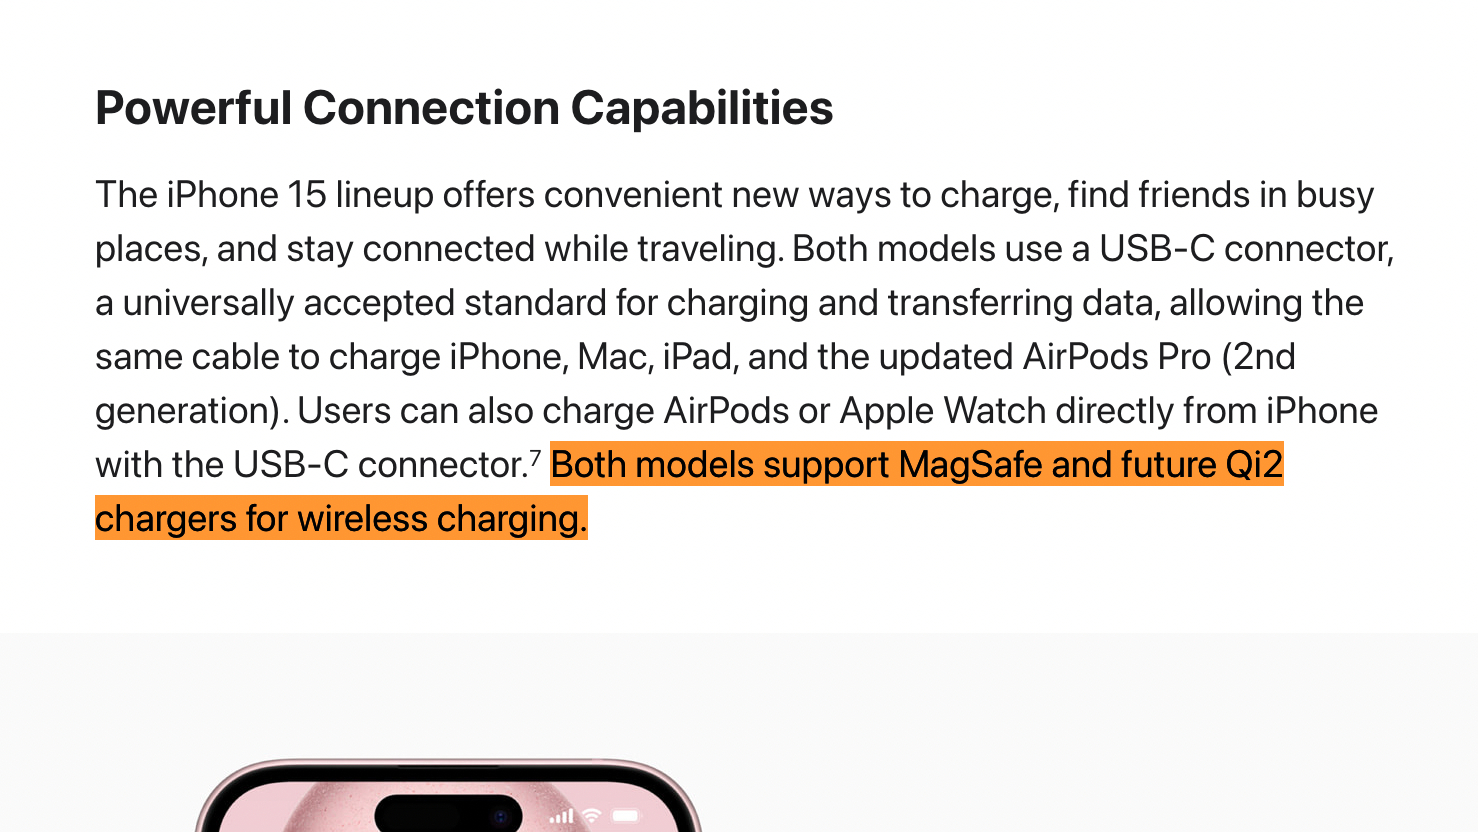 Press release excerpt for the iPhone 15